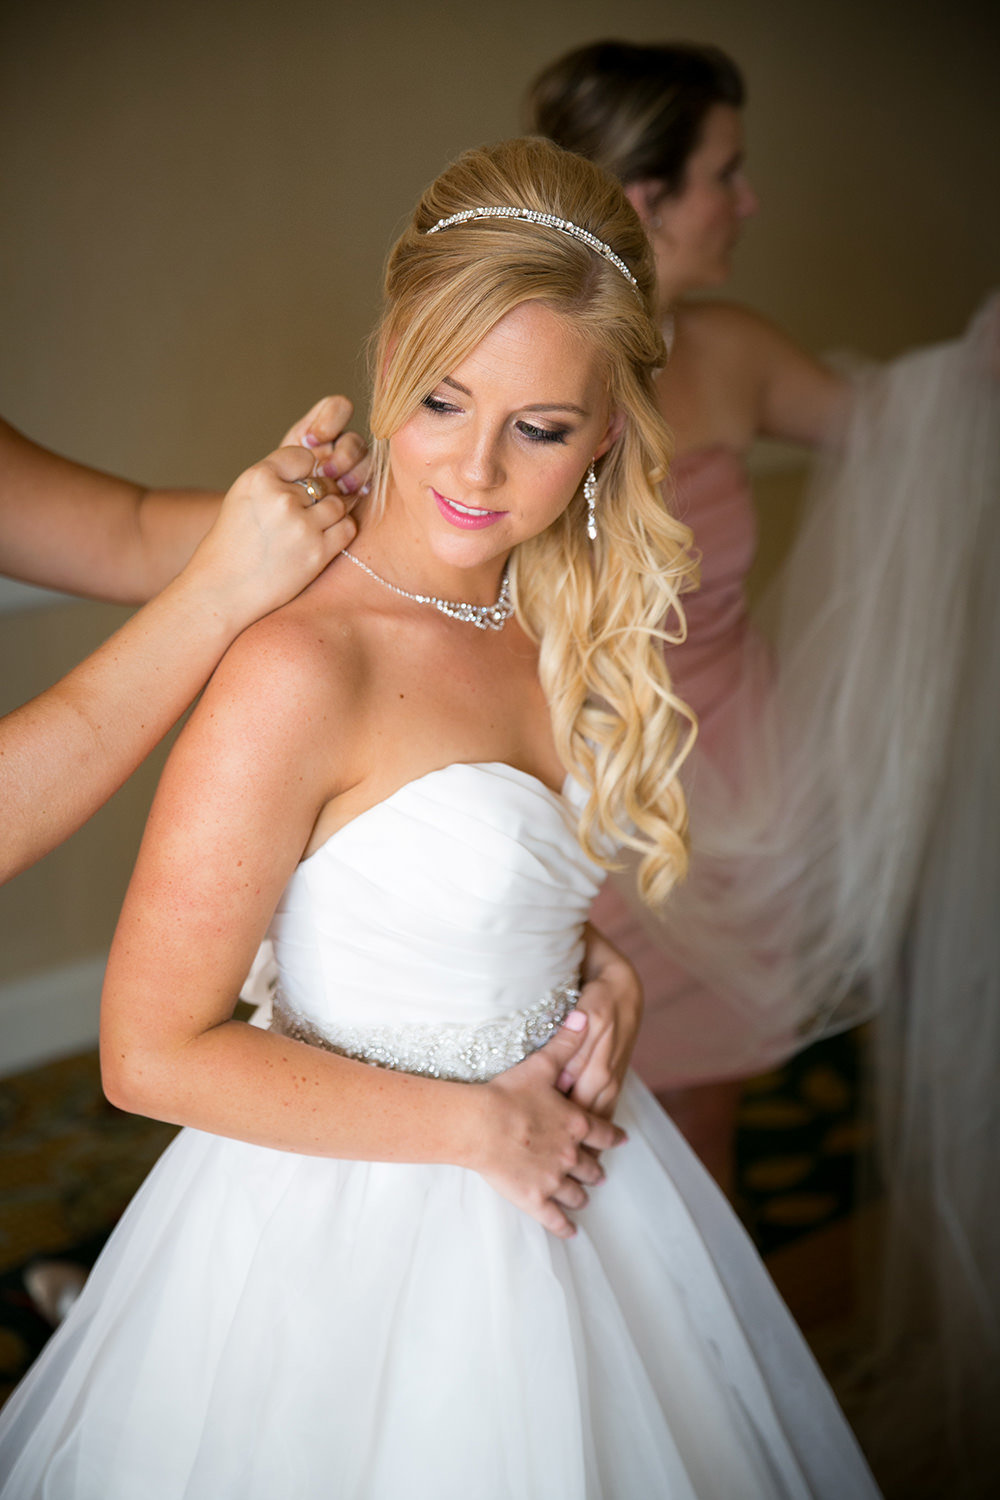 Beautiful blonde bride putting on the finishing touches for her wedding day